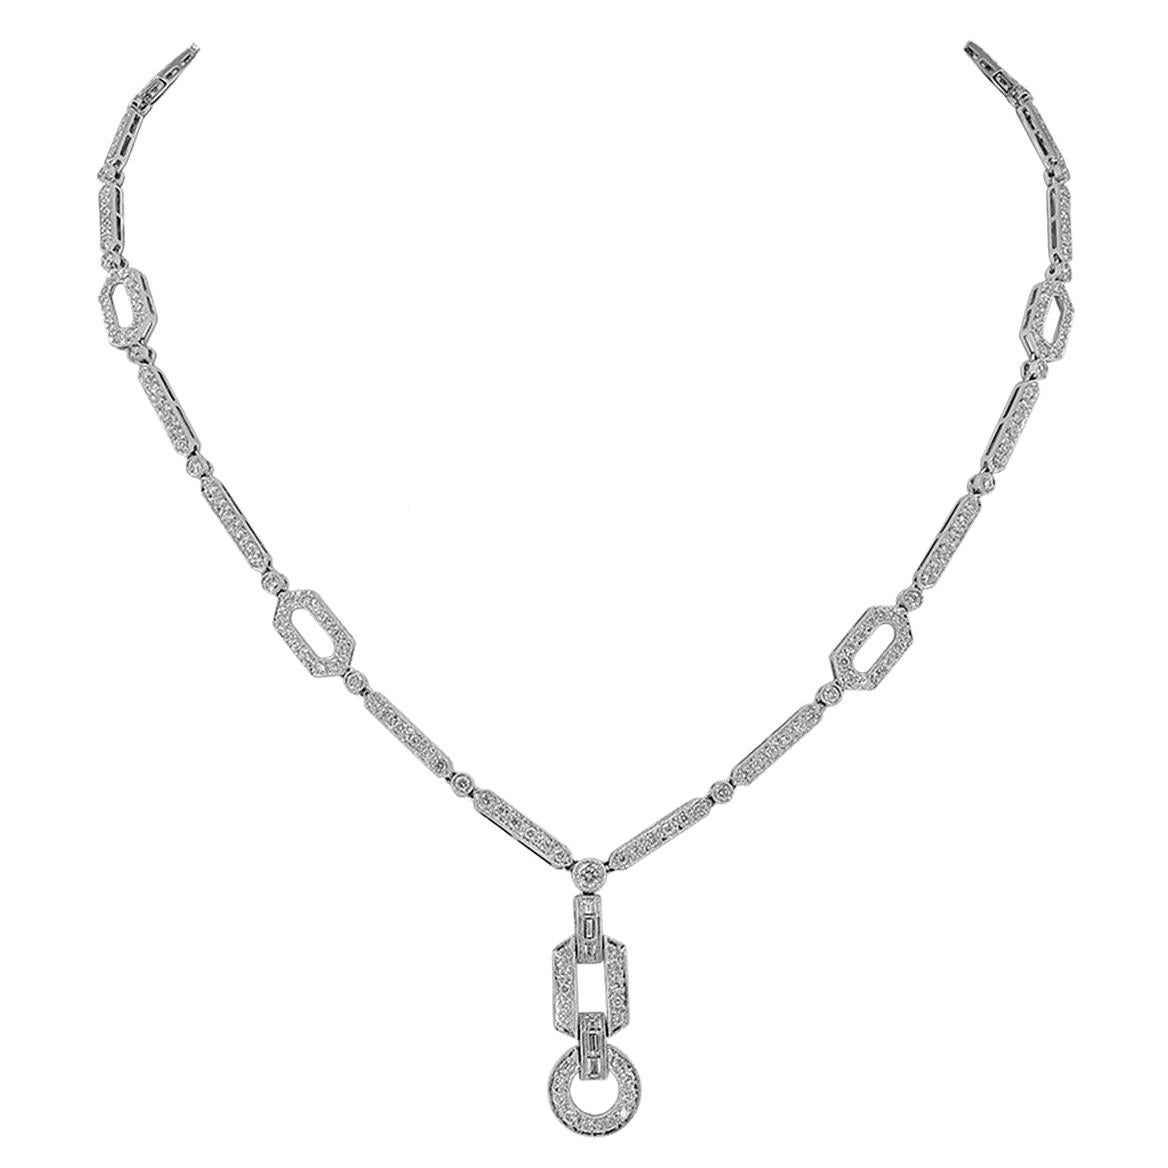 Contemporary Diamond Pave Articulated Lavalier Necklace